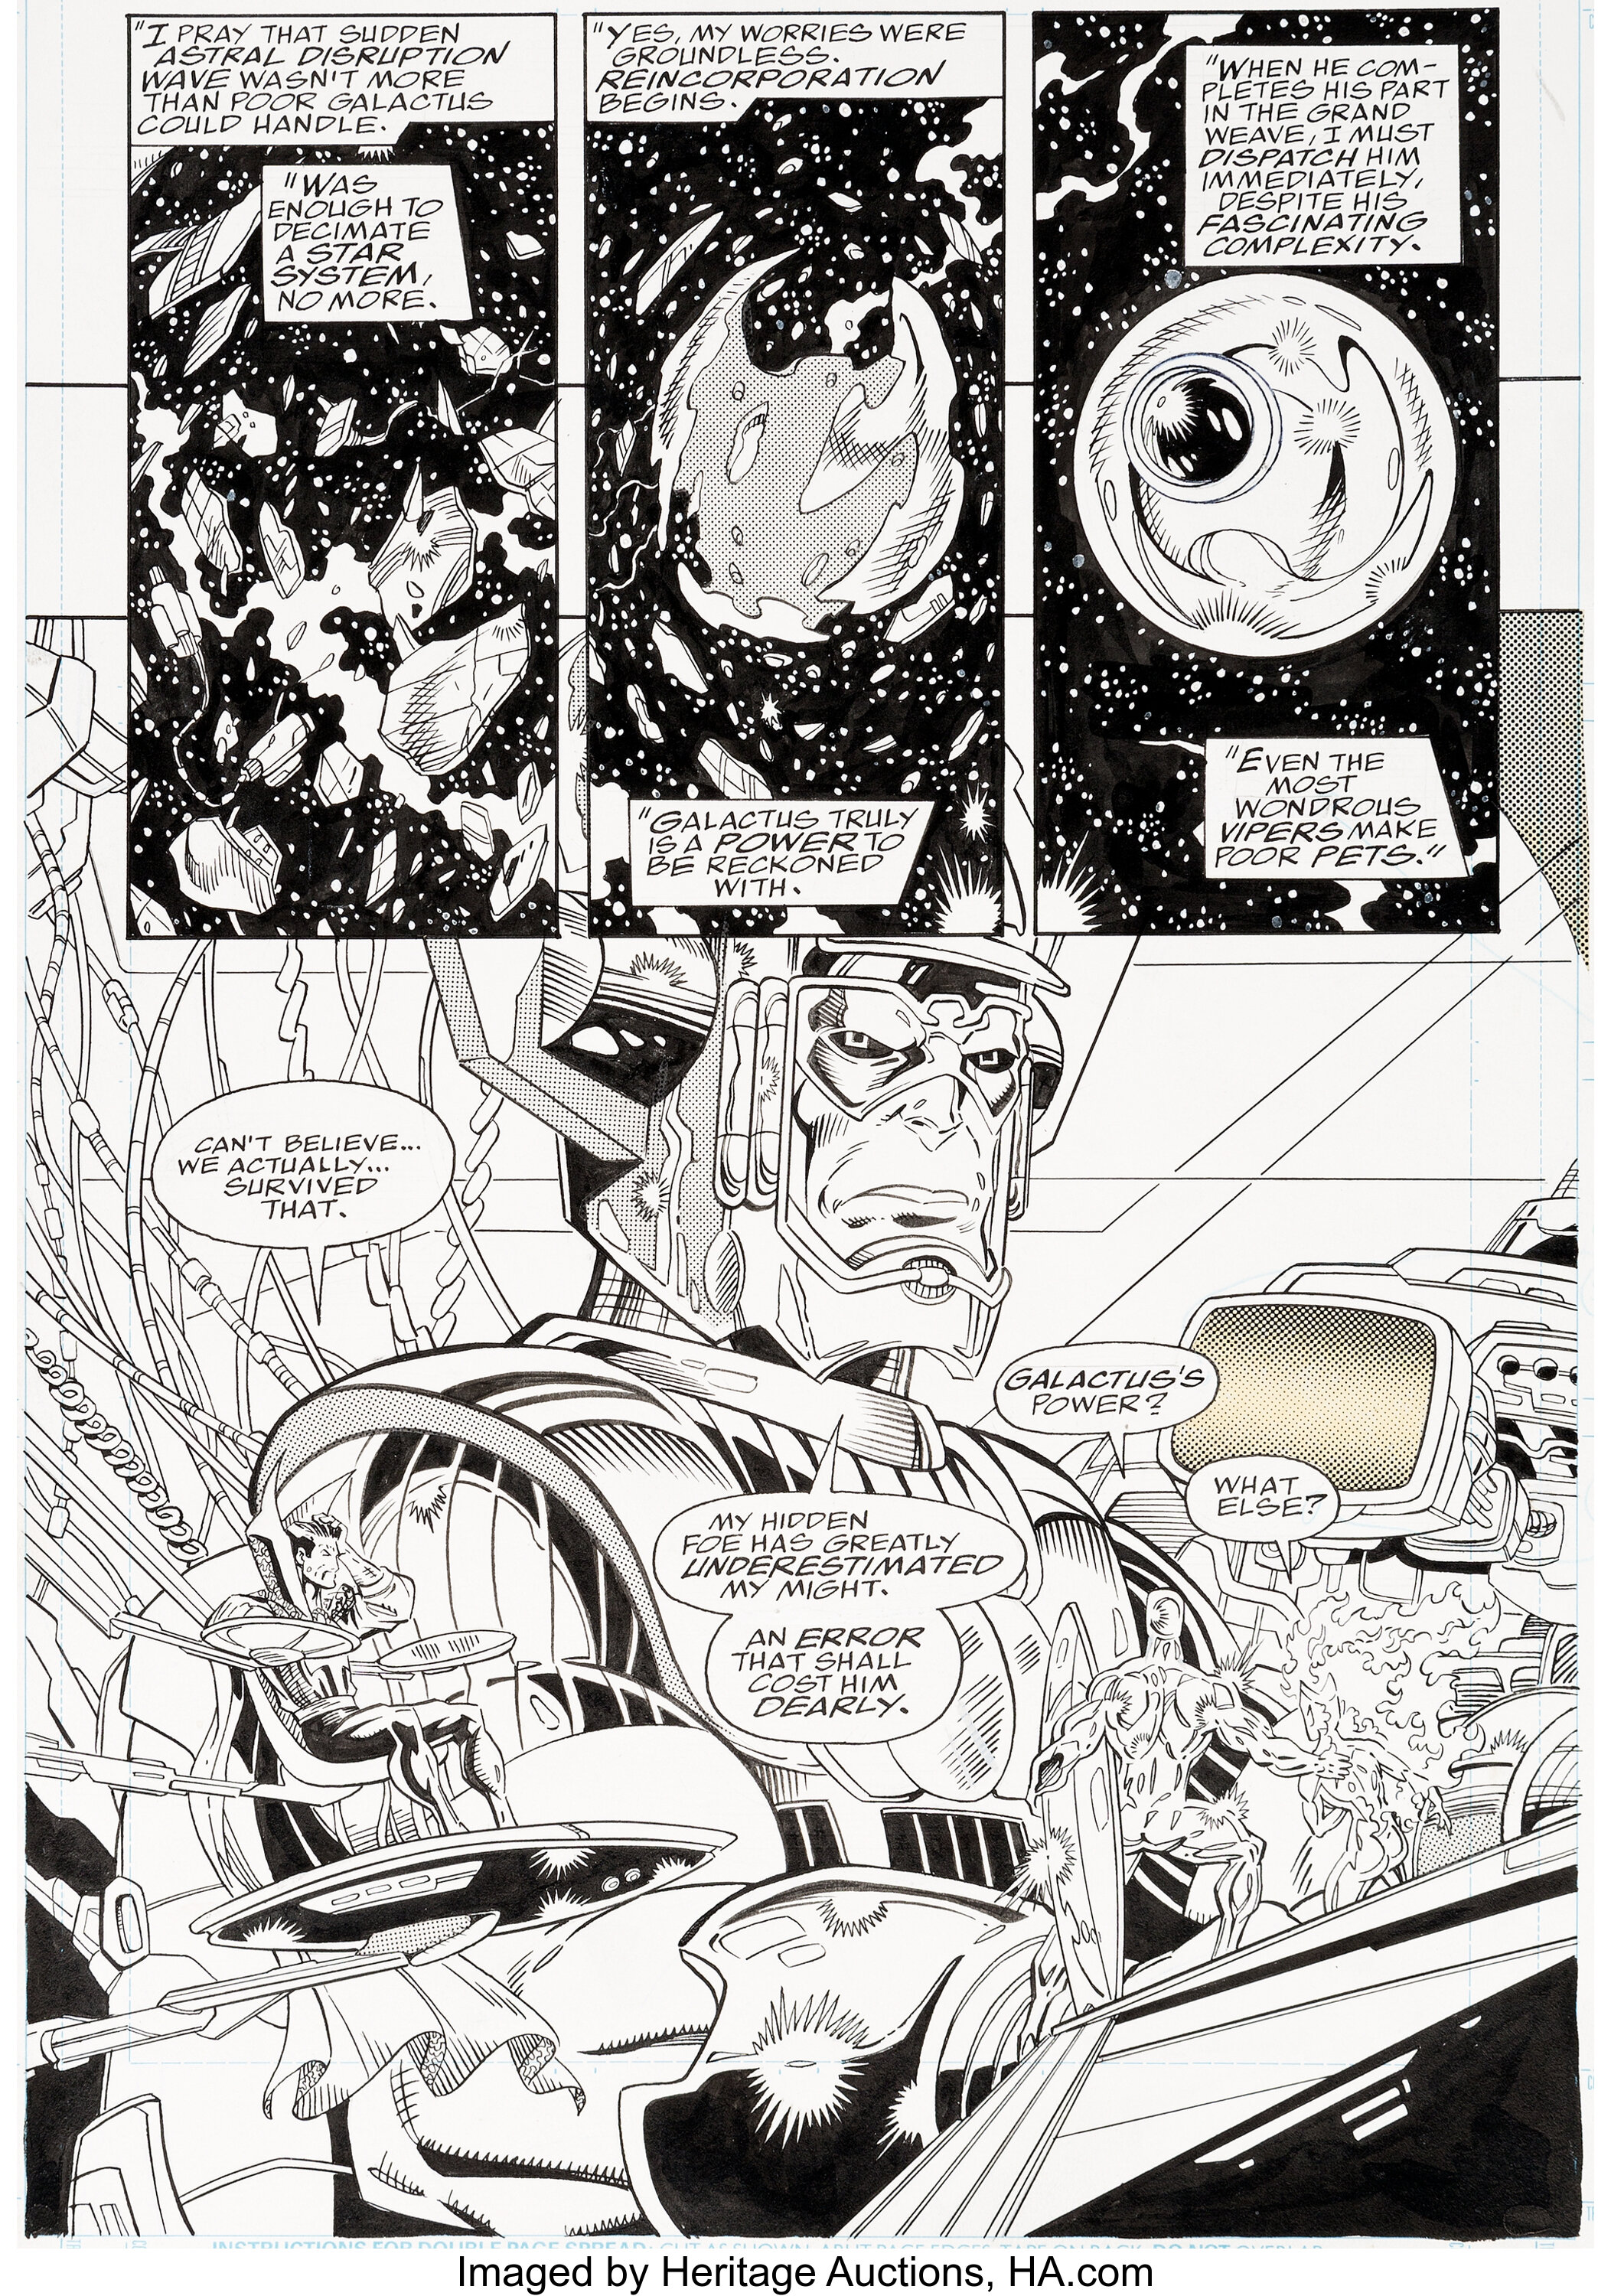 Ron Lim And Al Milgrom Infinity War 4 Partial Story Original Art Lot 93149 Heritage Auctions 6644